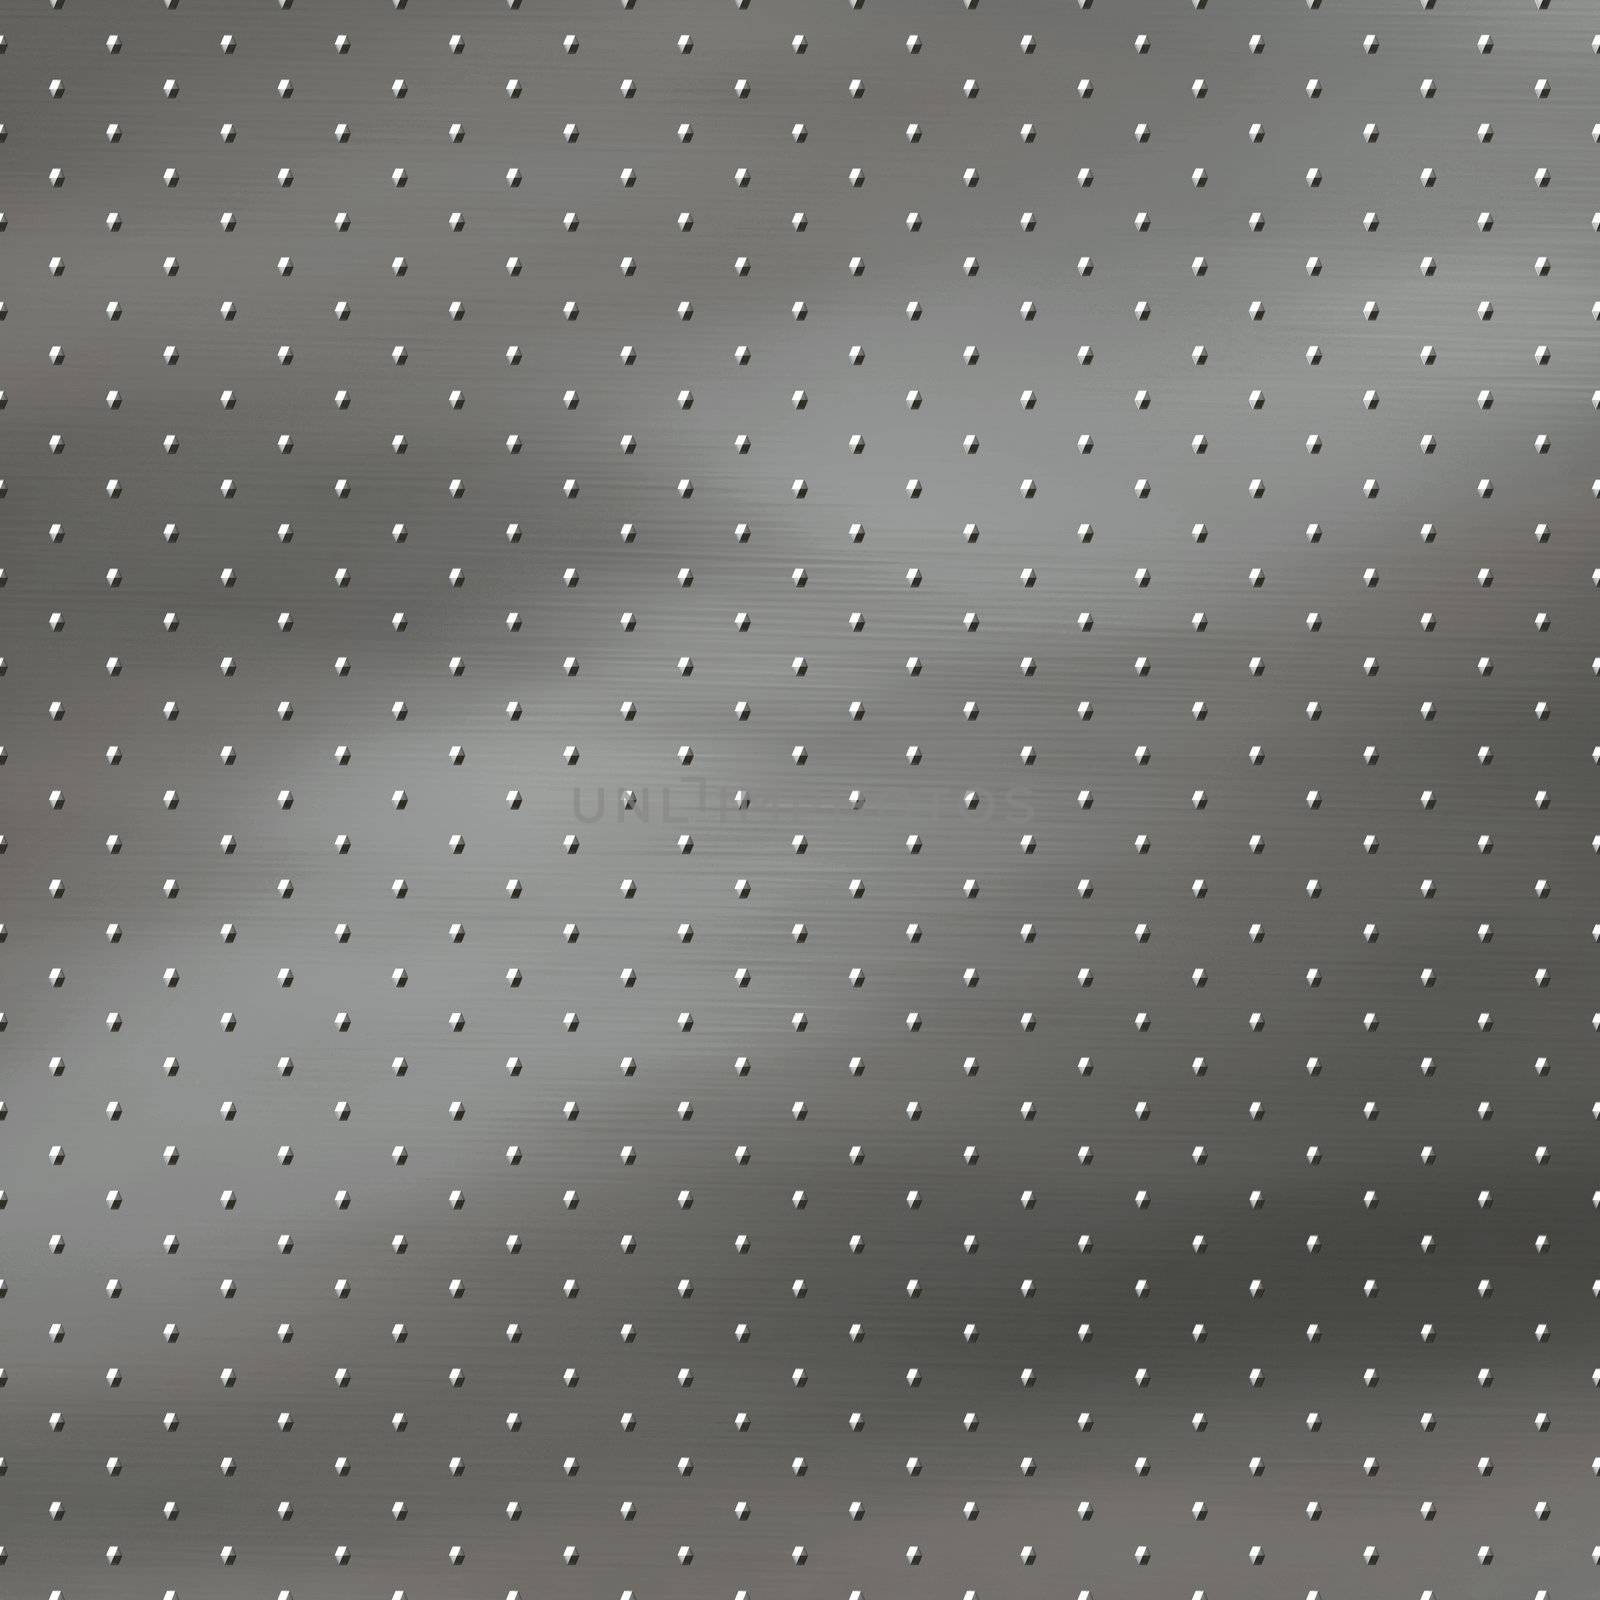 a large image of brushed metal with studs or rivets